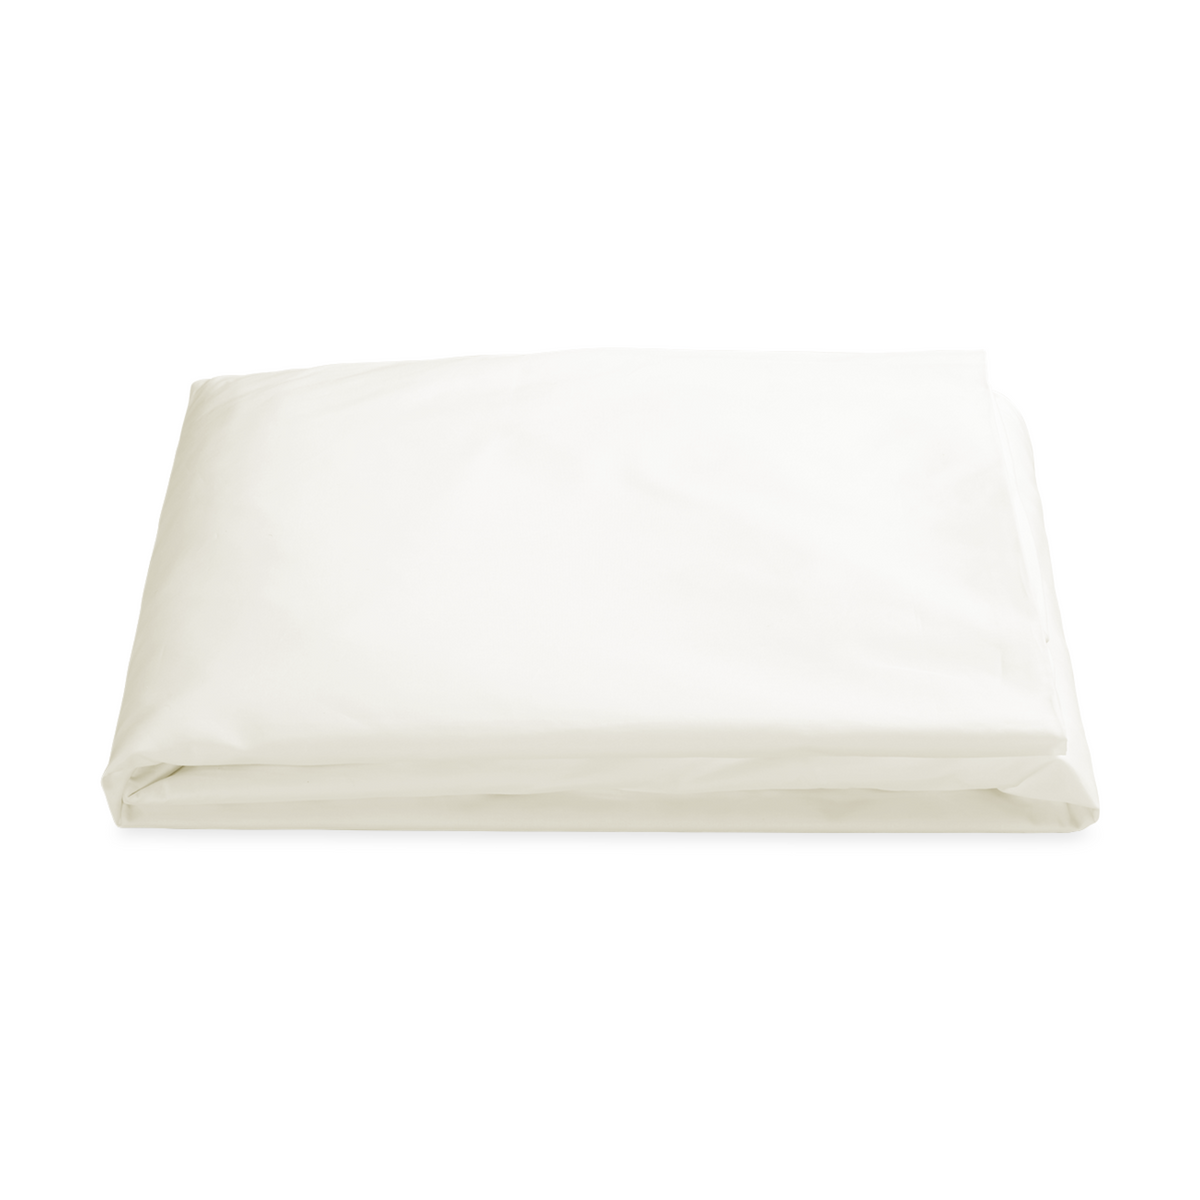 Fitted Sheets of Matouk Gatsby Bedding Ivory Color